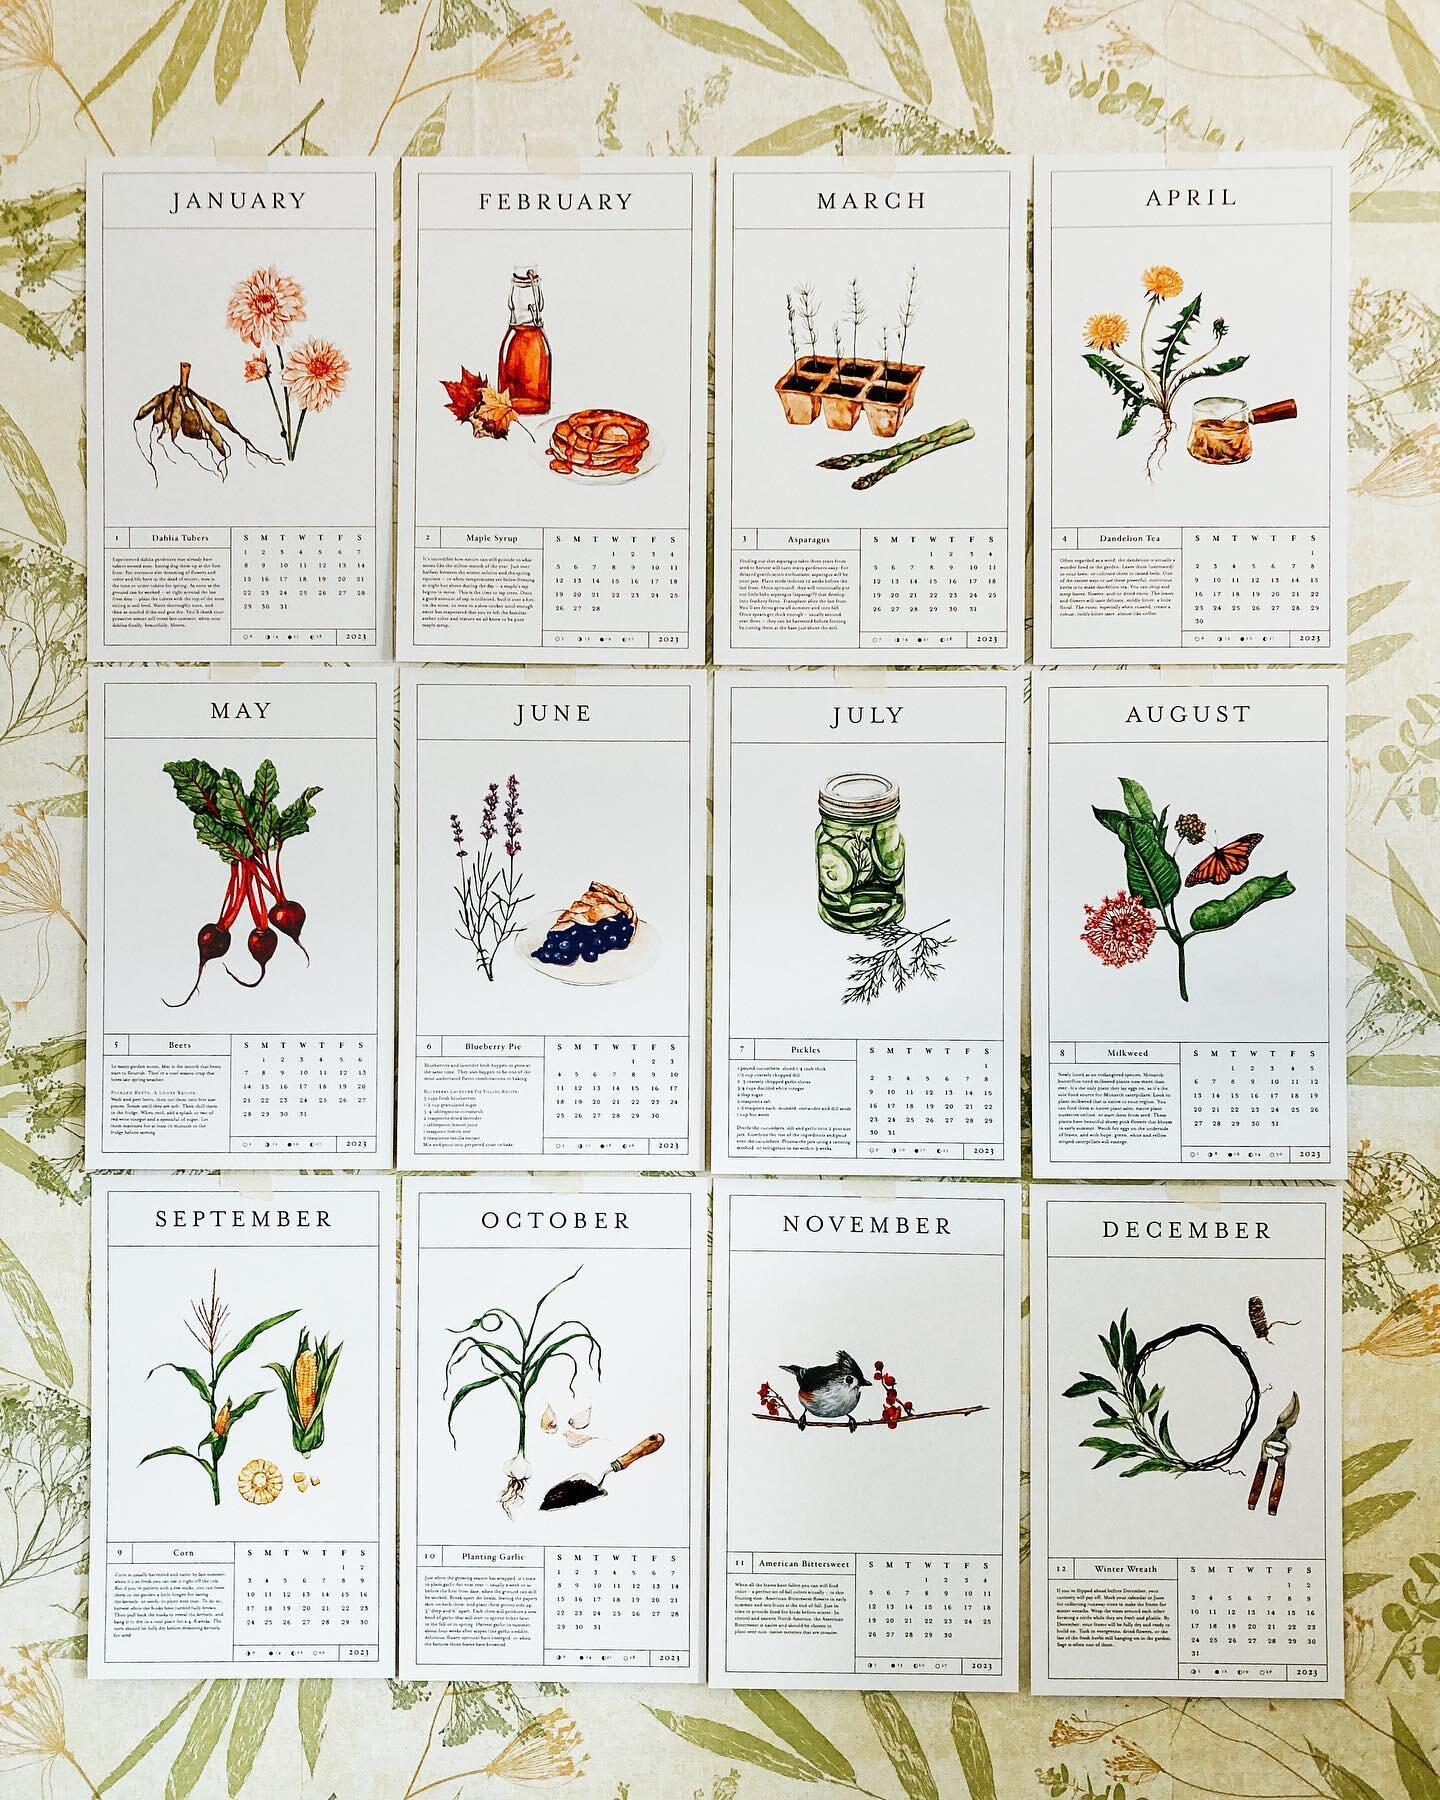 New display idea for the 2023 Gardener&rsquo;s Calendar. Why wait for each month? Just put the whole thing up. By the way, I&rsquo;m beyond grateful for all of your orders this year. I wasn&rsquo;t even sure I was going to make it again, or make it t